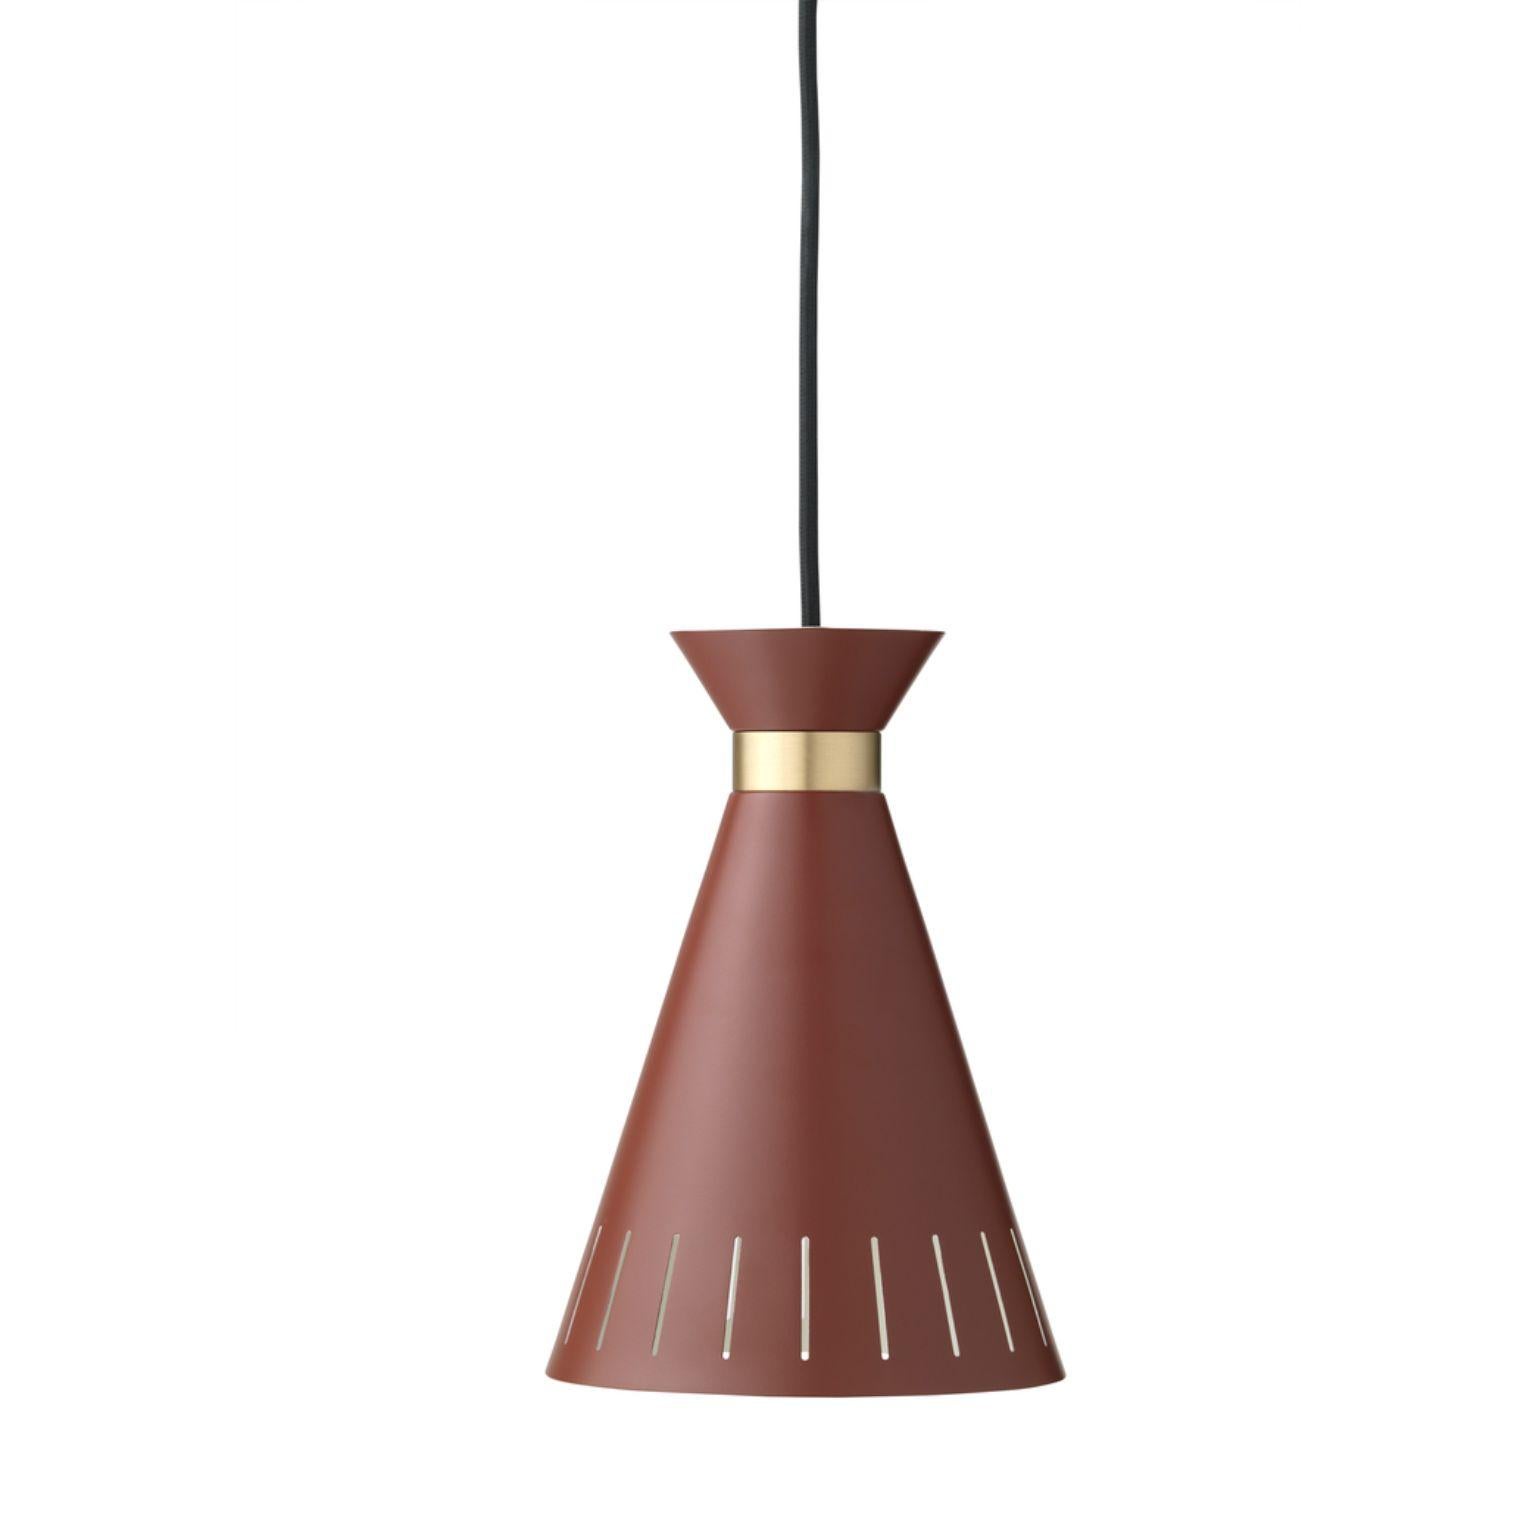 Cone Oxide red pendant by Warm Nordic
Dimensions: D 16x W 16 x H 23 cm
Material: Lacquered steel, Solid brass
Weight: 1 kg
Also available in different colours.

A classic pendant with charm, finesse and an elegant, solid brass ring, designed